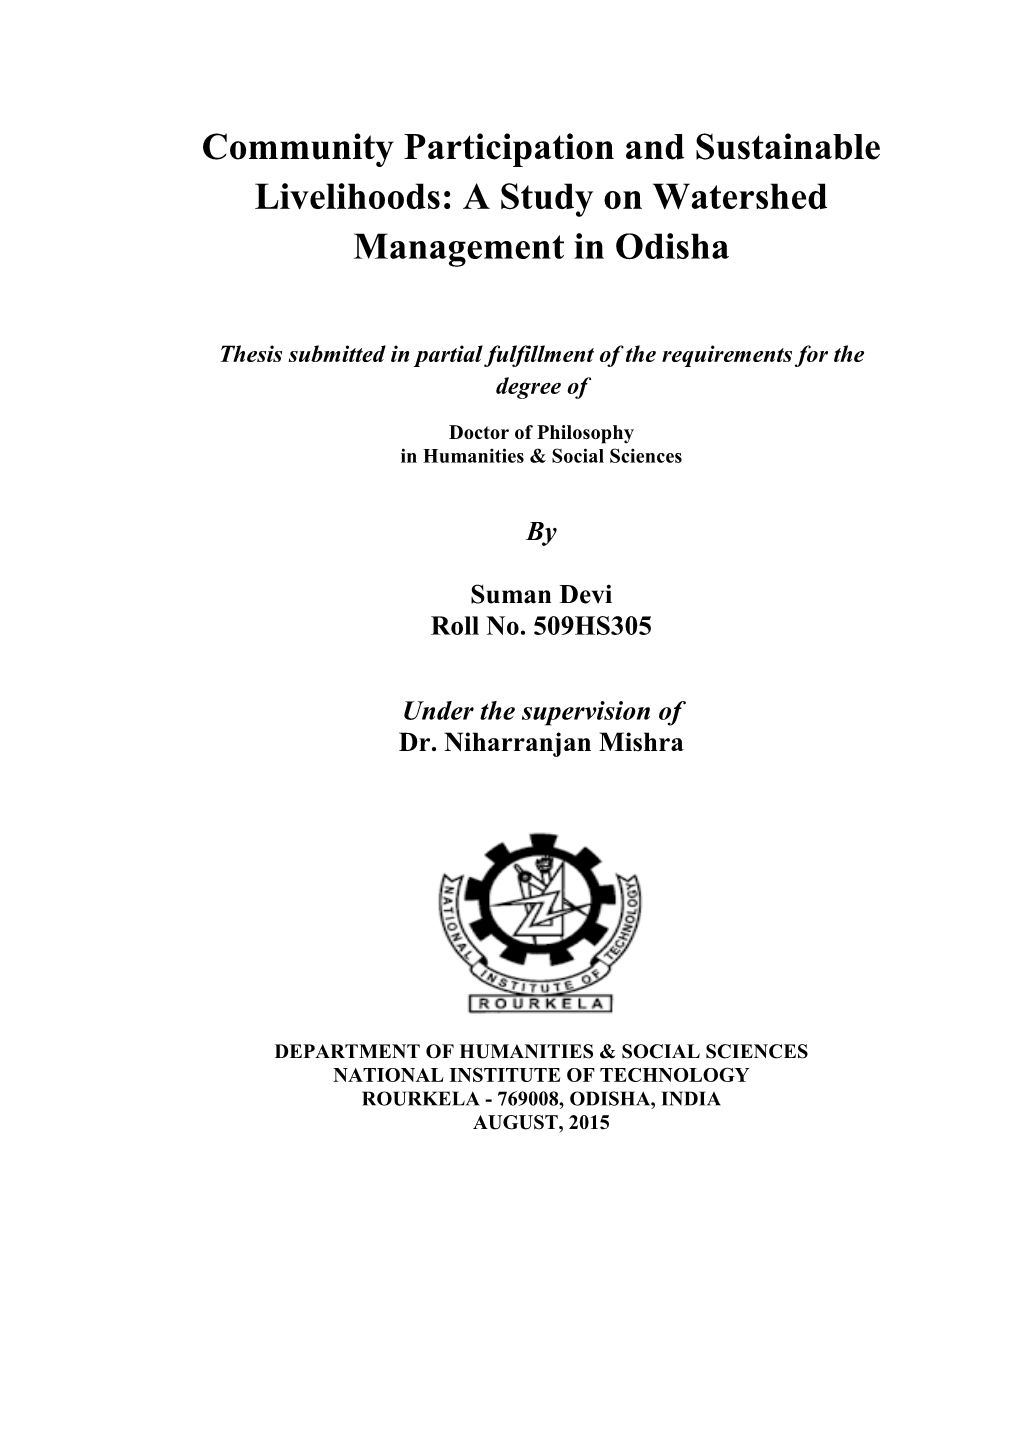 Community Participation and Sustainable Livelihoods: a Study on Watershed Management in Odisha